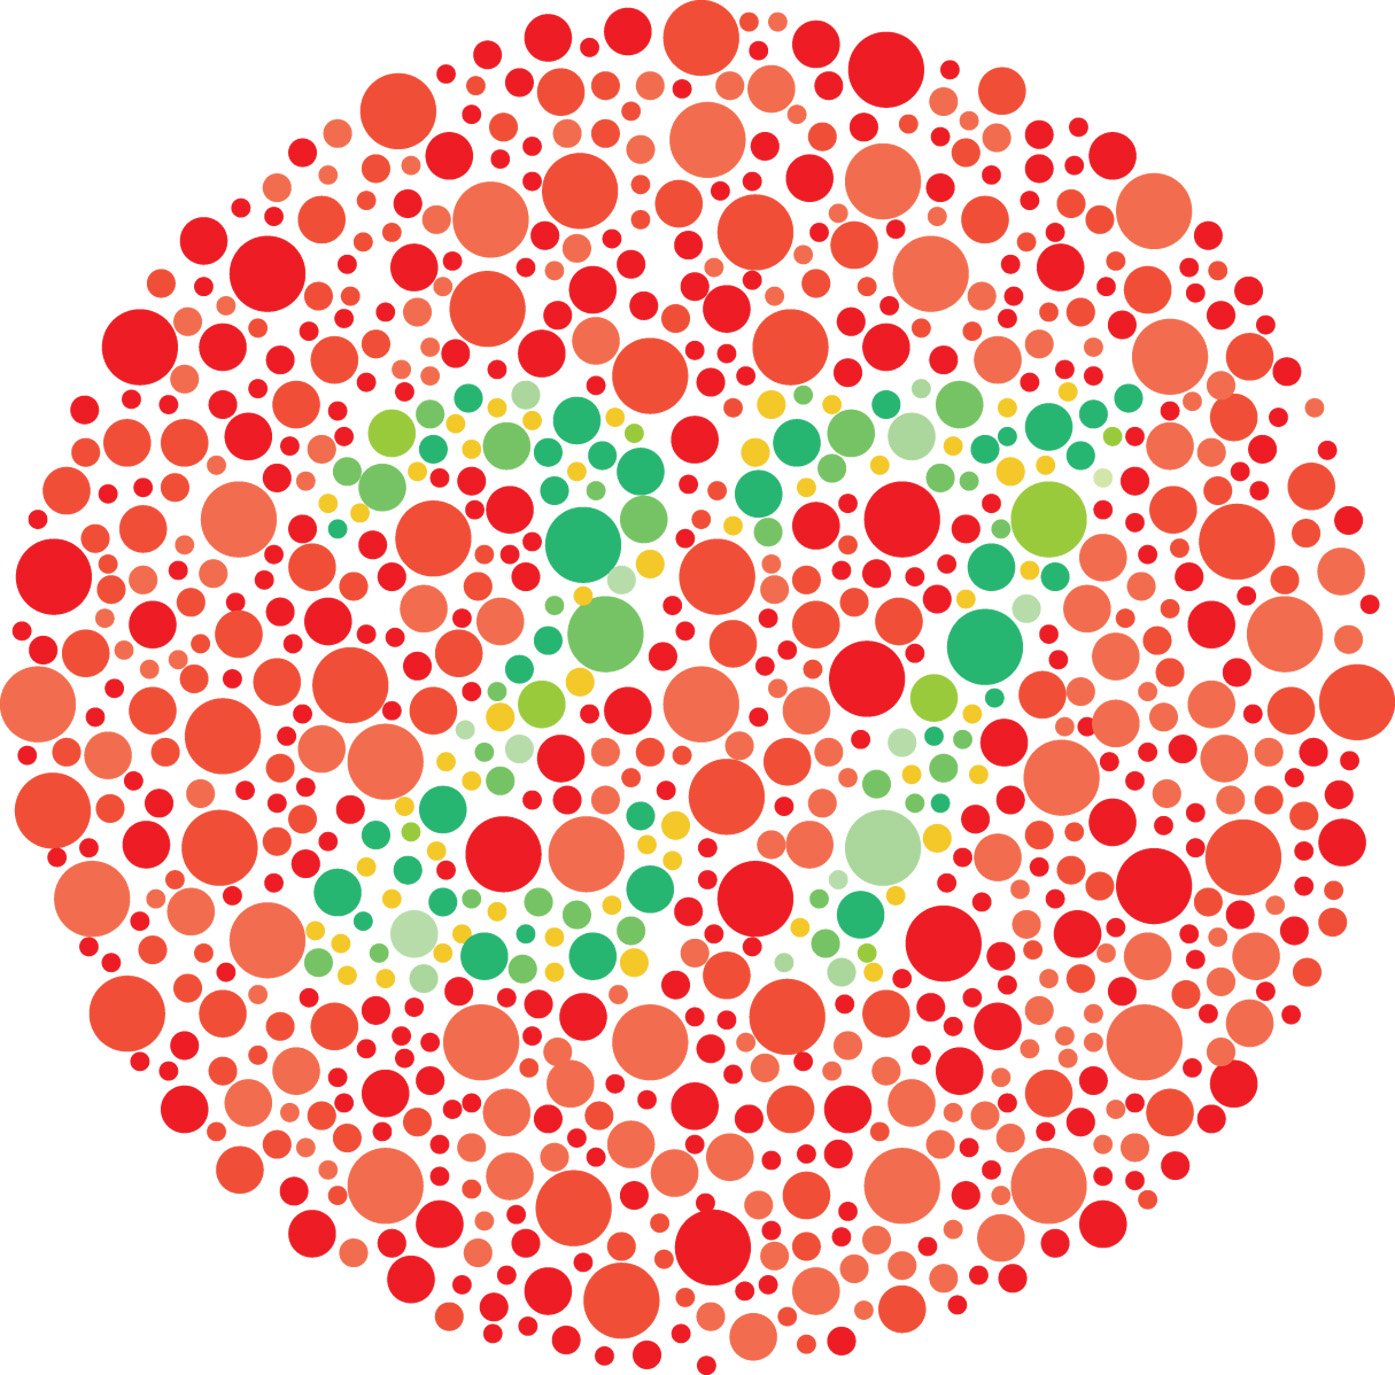 An Ishihara test for Red-Green Colourblindness (Credit: Wikipedia) .